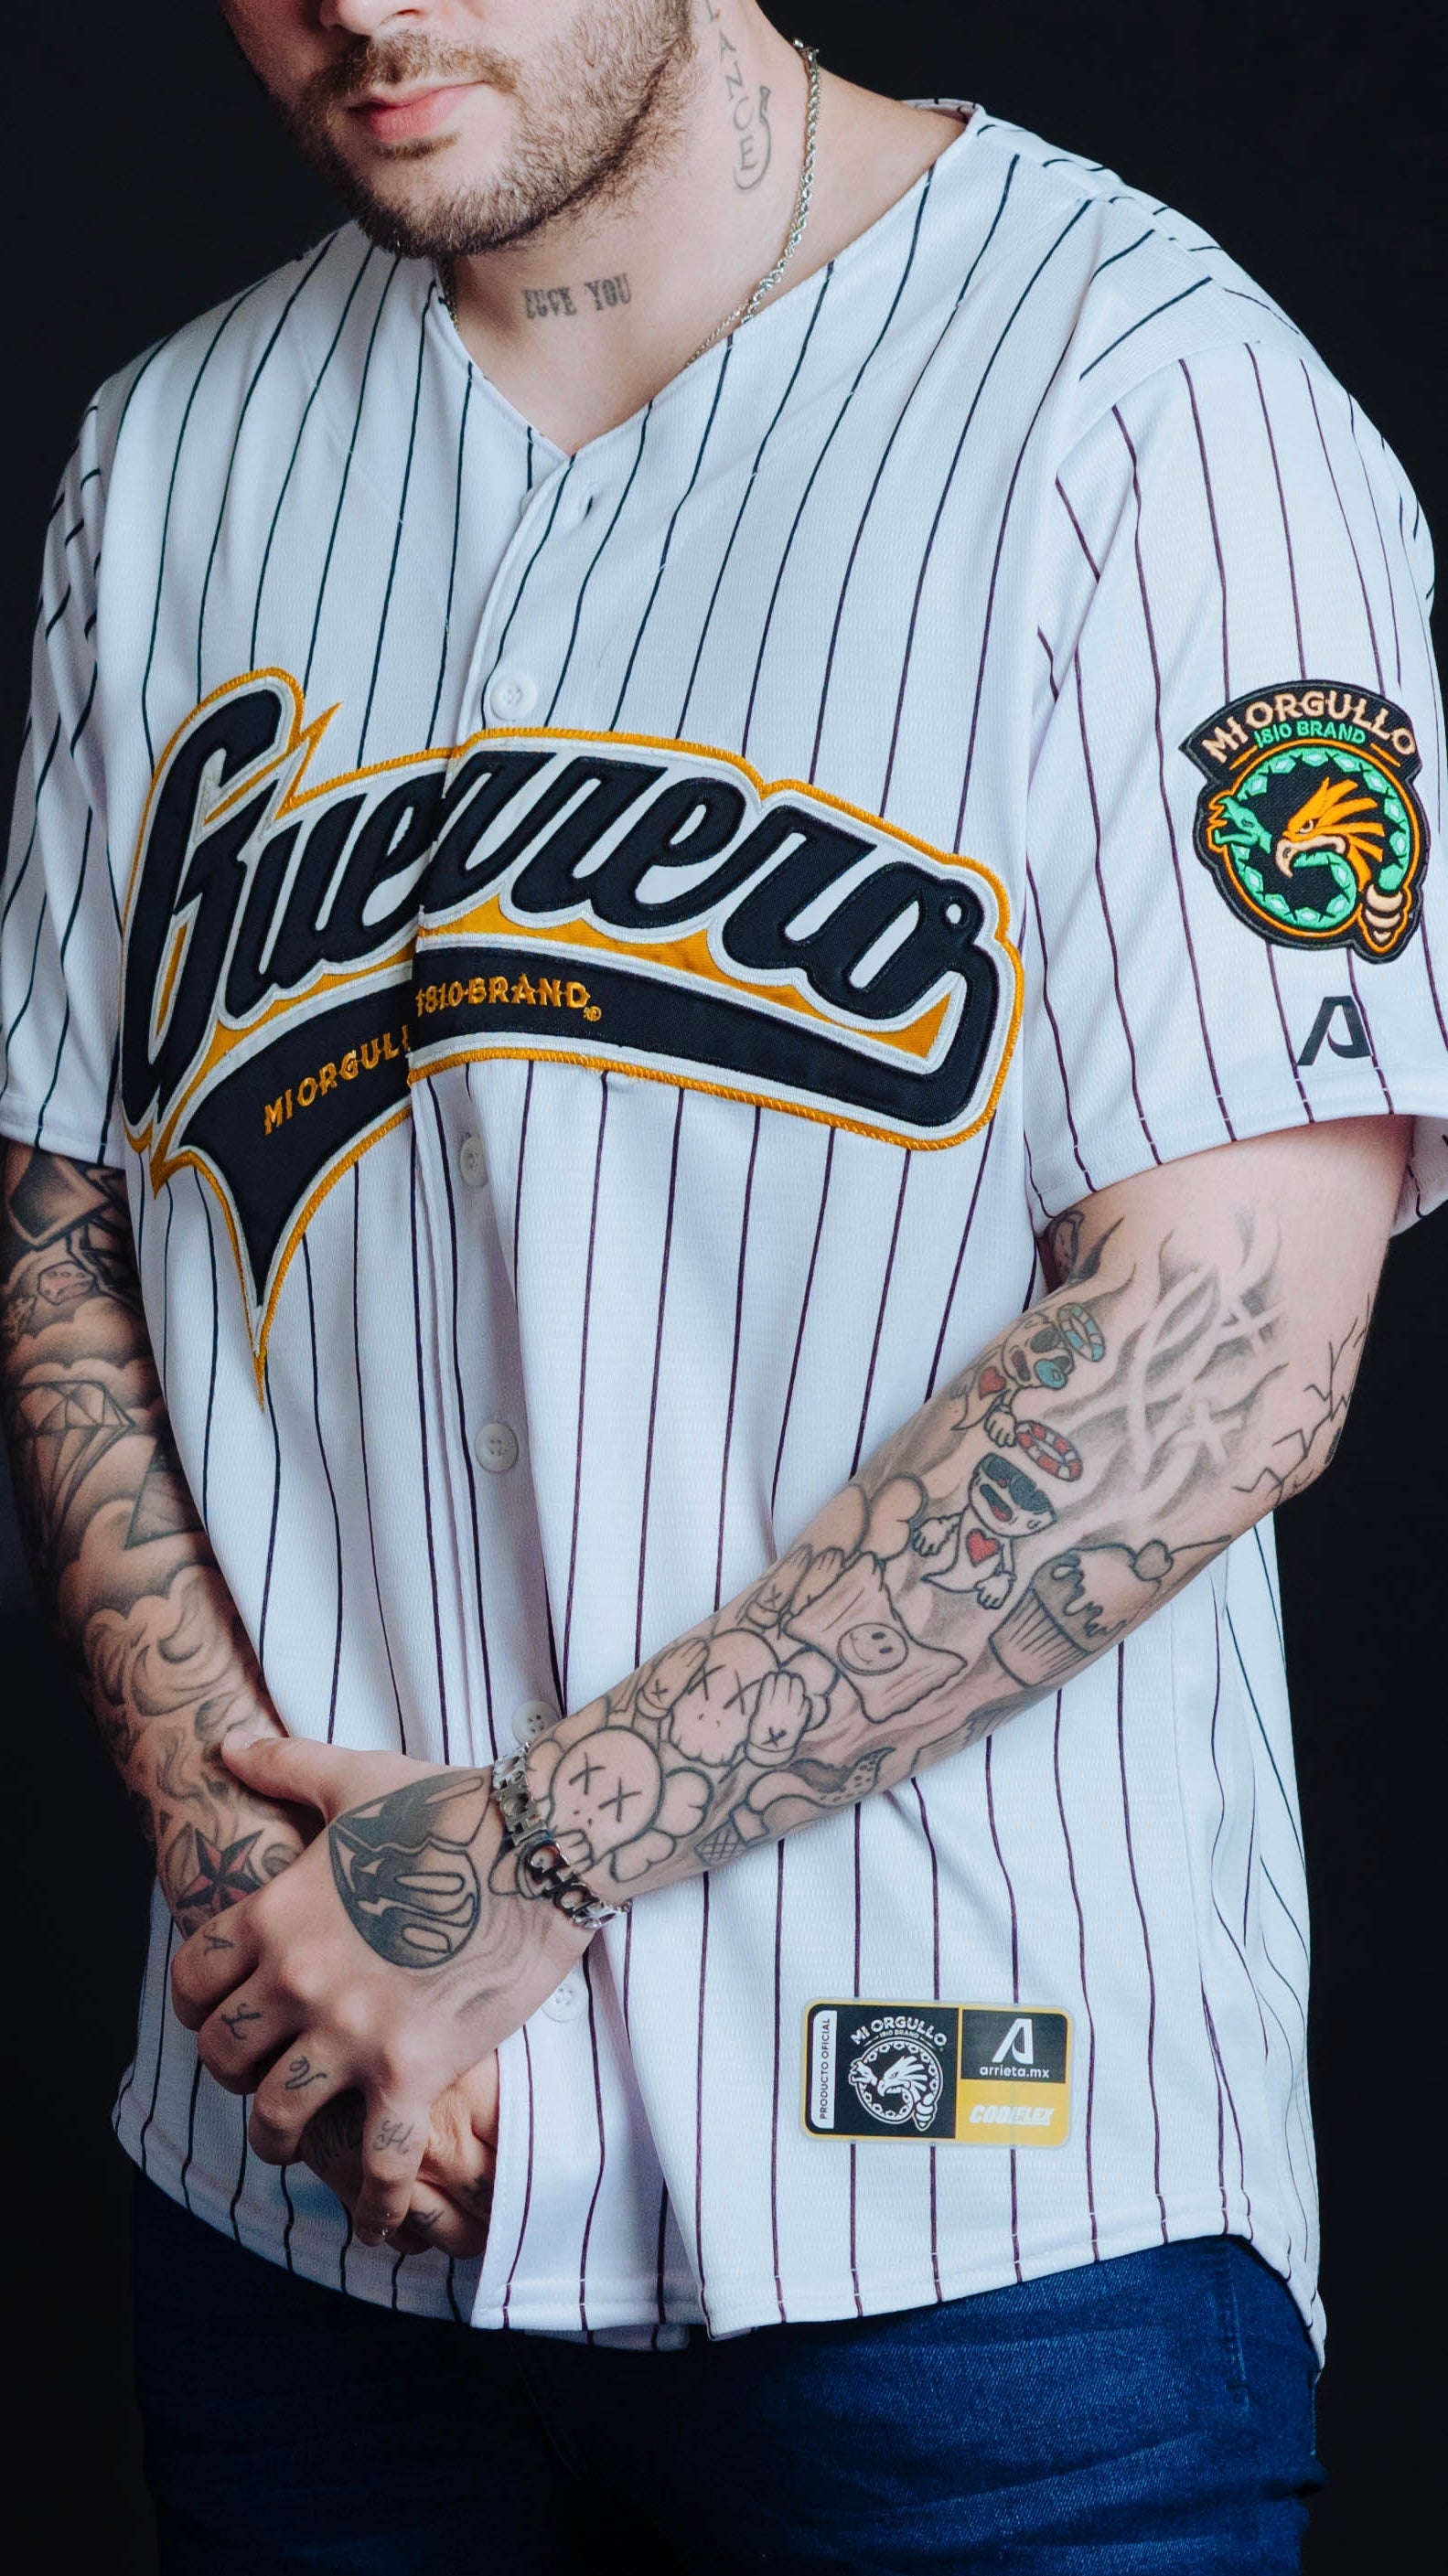 GUERRERO STRIPPED JERSEY